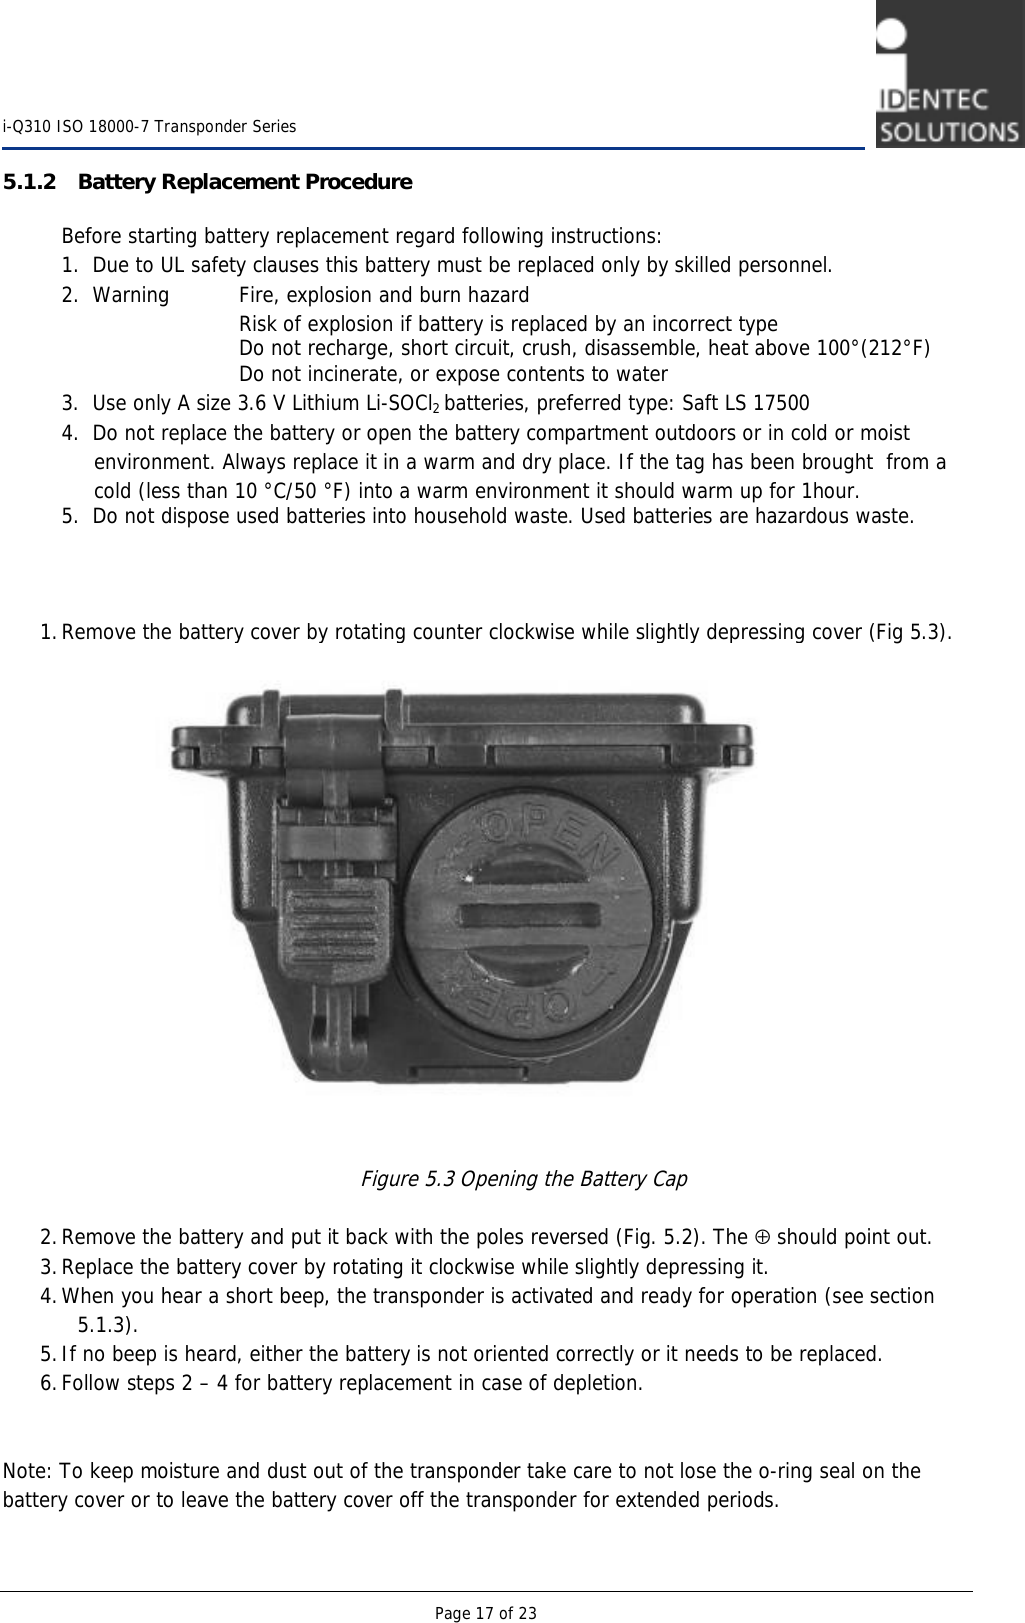    i-Q310 ISO 18000-7 Transponder Series  Page 17 of 23 5.1.2 Battery Replacement Procedure   Before starting battery replacement regard following instructions:   1.  Due to UL safety clauses this battery must be replaced only by skilled personnel.   2.  Warning     Fire, explosion and burn hazard          Risk of explosion if battery is replaced by an incorrect type     Do not recharge, short circuit, crush, disassemble, heat above 100°(212°F)          Do not incinerate, or expose contents to water  3.  Use only A size 3.6 V Lithium Li-SOCl2 batteries, preferred type: Saft LS 17500    4.  Do not replace the battery or open the battery compartment outdoors or in cold or moist                    environment. Always replace it in a warm and dry place. If the tag has been brought  from a         cold (less than 10 °C/50 °F) into a warm environment it should warm up for 1hour.   5.  Do not dispose used batteries into household waste. Used batteries are hazardous waste.        1. Remove the battery cover by rotating counter clockwise while slightly depressing cover (Fig 5.3).                    Figure 5.3 Opening the Battery Cap  2. Remove the battery and put it back with the poles reversed (Fig. 5.2). The ⊕ should point out.  3. Replace the battery cover by rotating it clockwise while slightly depressing it. 4. When you hear a short beep, the transponder is activated and ready for operation (see section 5.1.3).  5. If no beep is heard, either the battery is not oriented correctly or it needs to be replaced.  6. Follow steps 2 – 4 for battery replacement in case of depletion.    Note: To keep moisture and dust out of the transponder take care to not lose the o-ring seal on the battery cover or to leave the battery cover off the transponder for extended periods.  